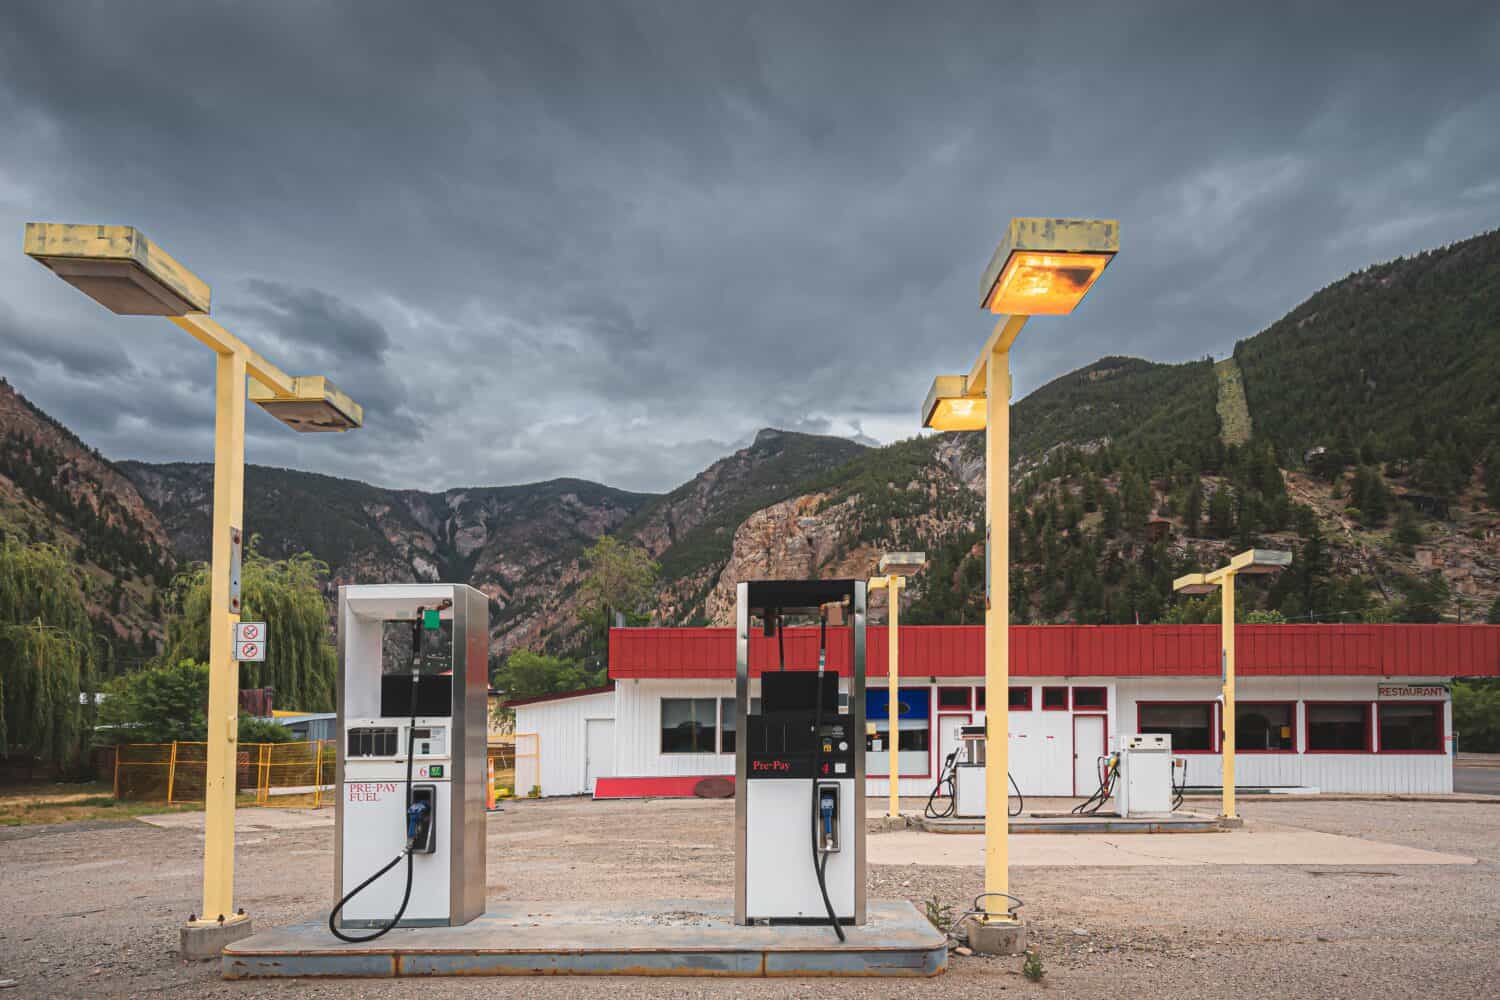 An old abandoned gas station rest stop in mining town Hedley, BC in the Okanagan against a dark moody sky.